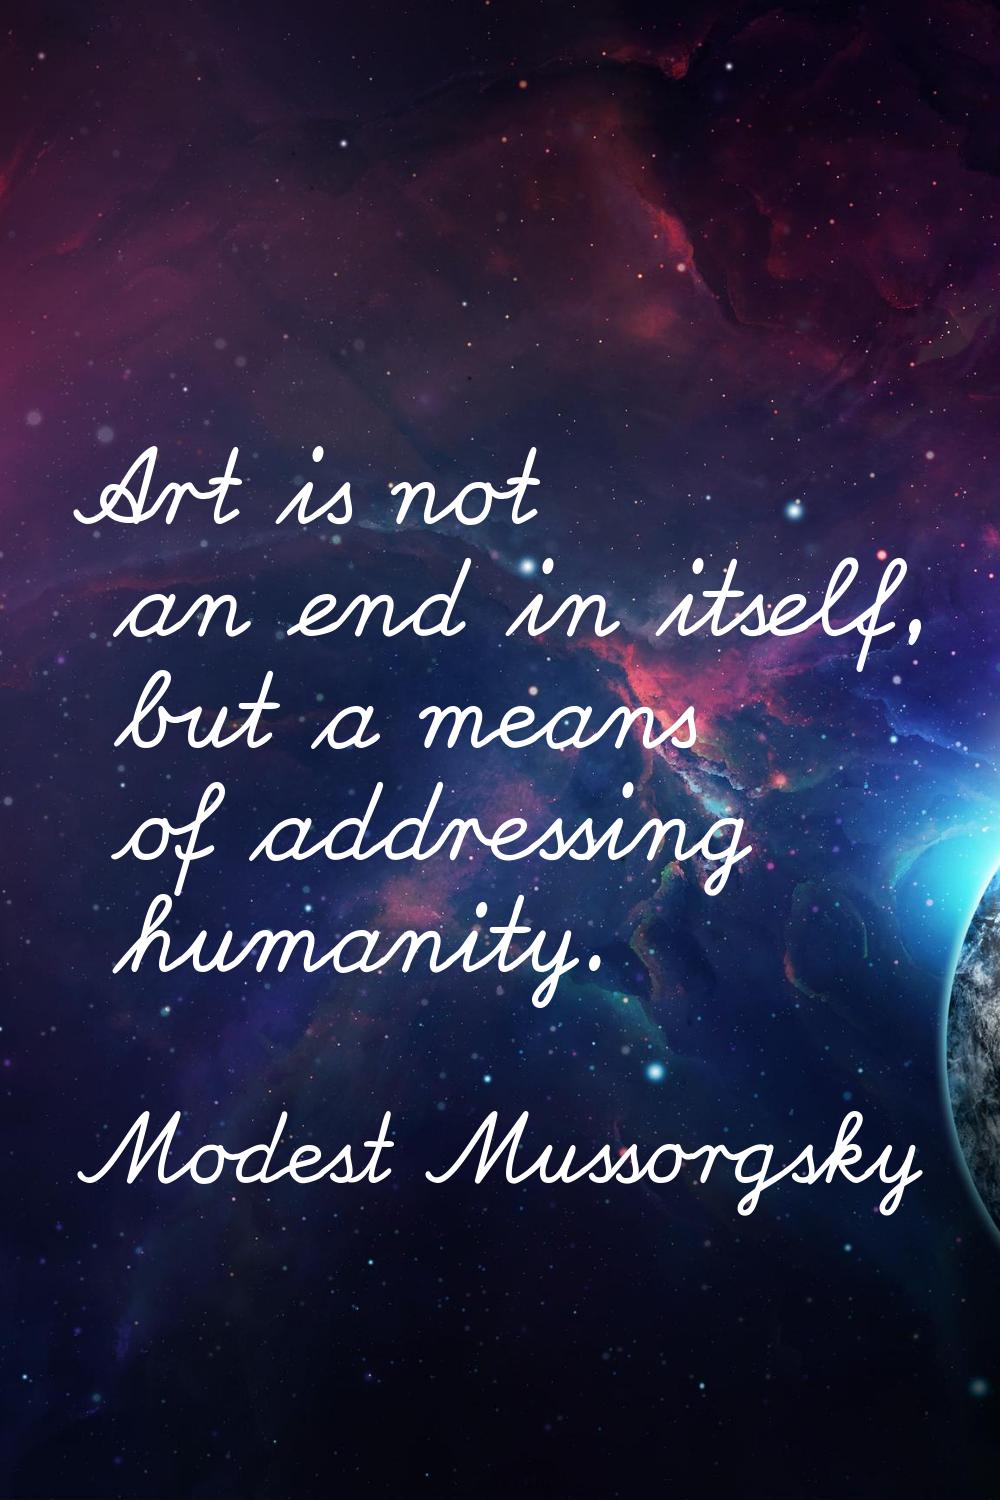 Art is not an end in itself, but a means of addressing humanity.